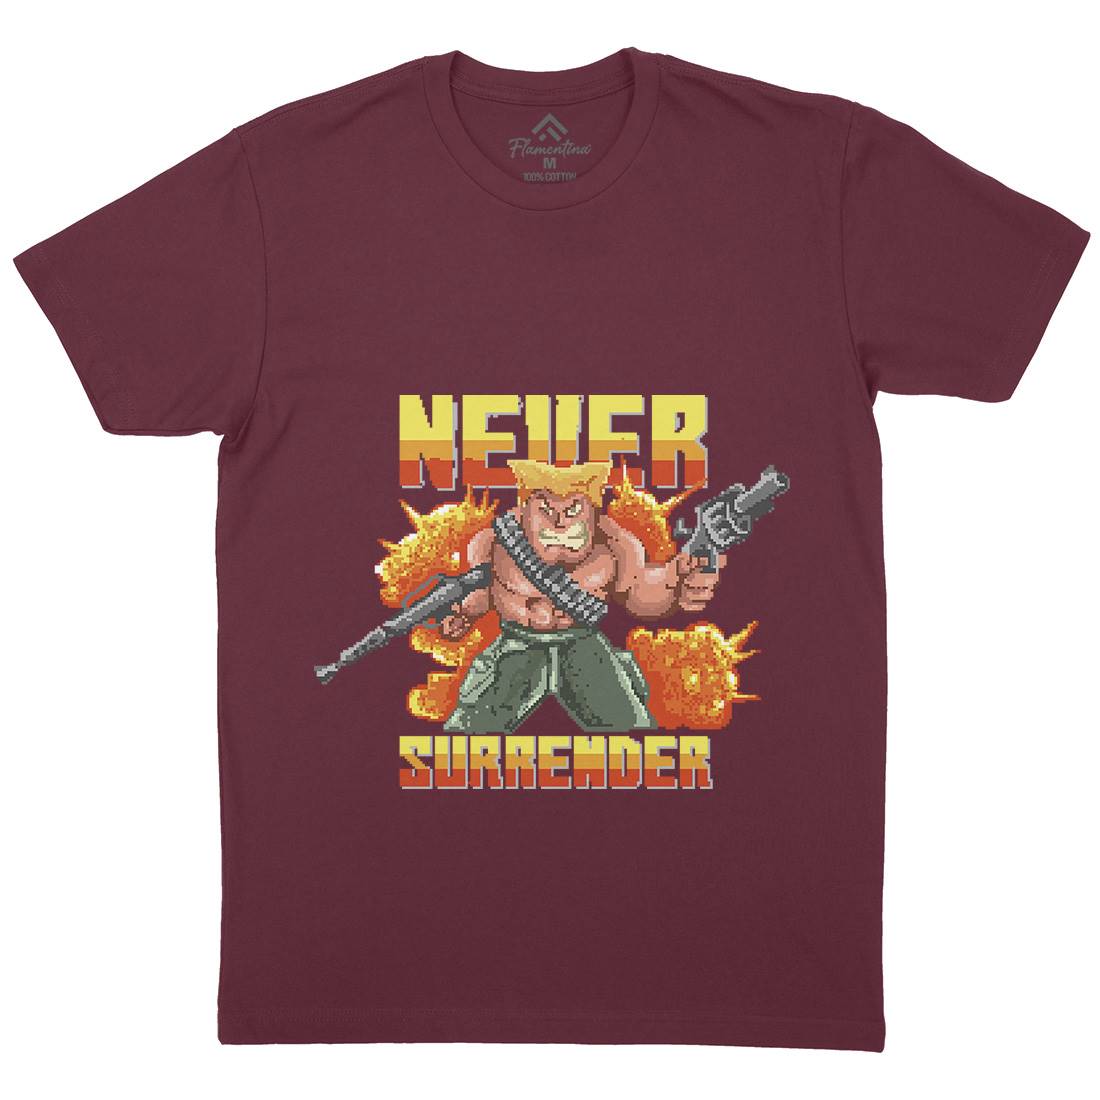 Never Surrender Mens Crew Neck T-Shirt Army B939